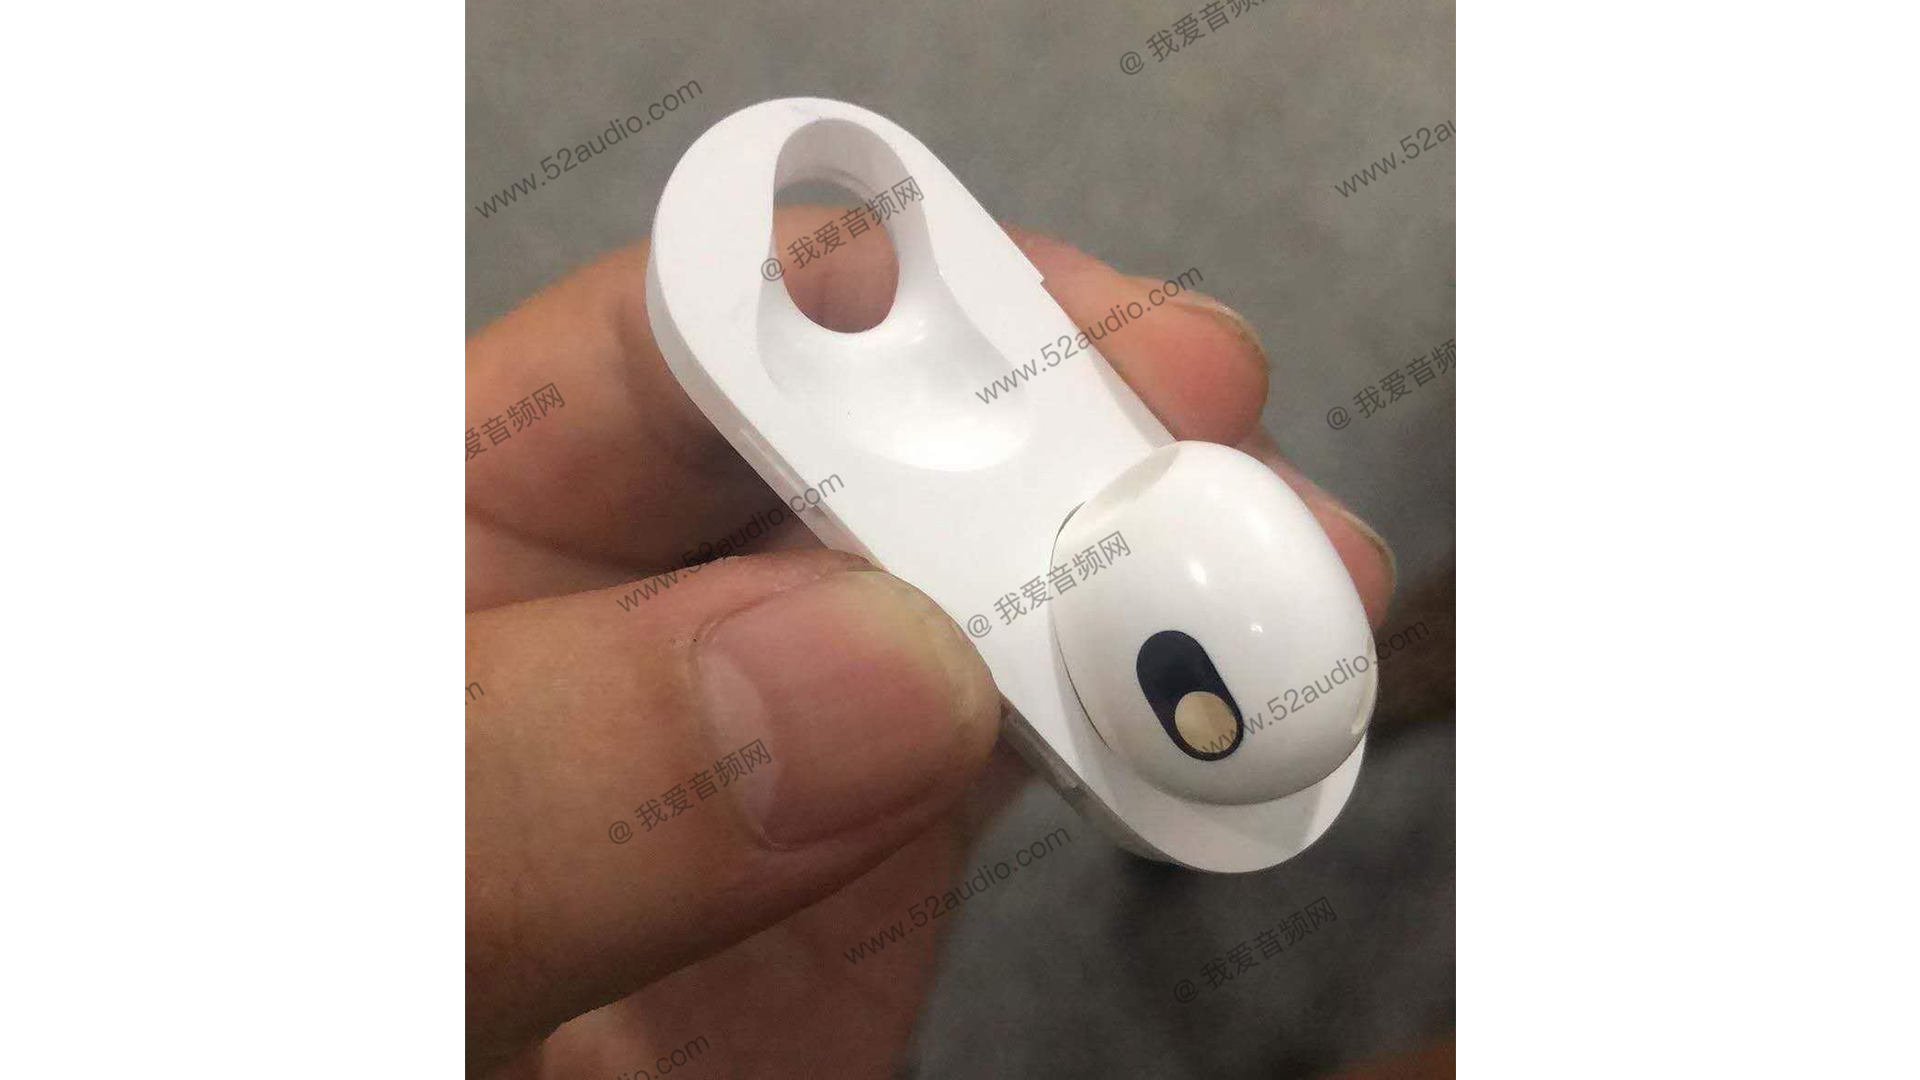 The alleged AirPods 3 parts photo shows a design inspired by AirPods Pro